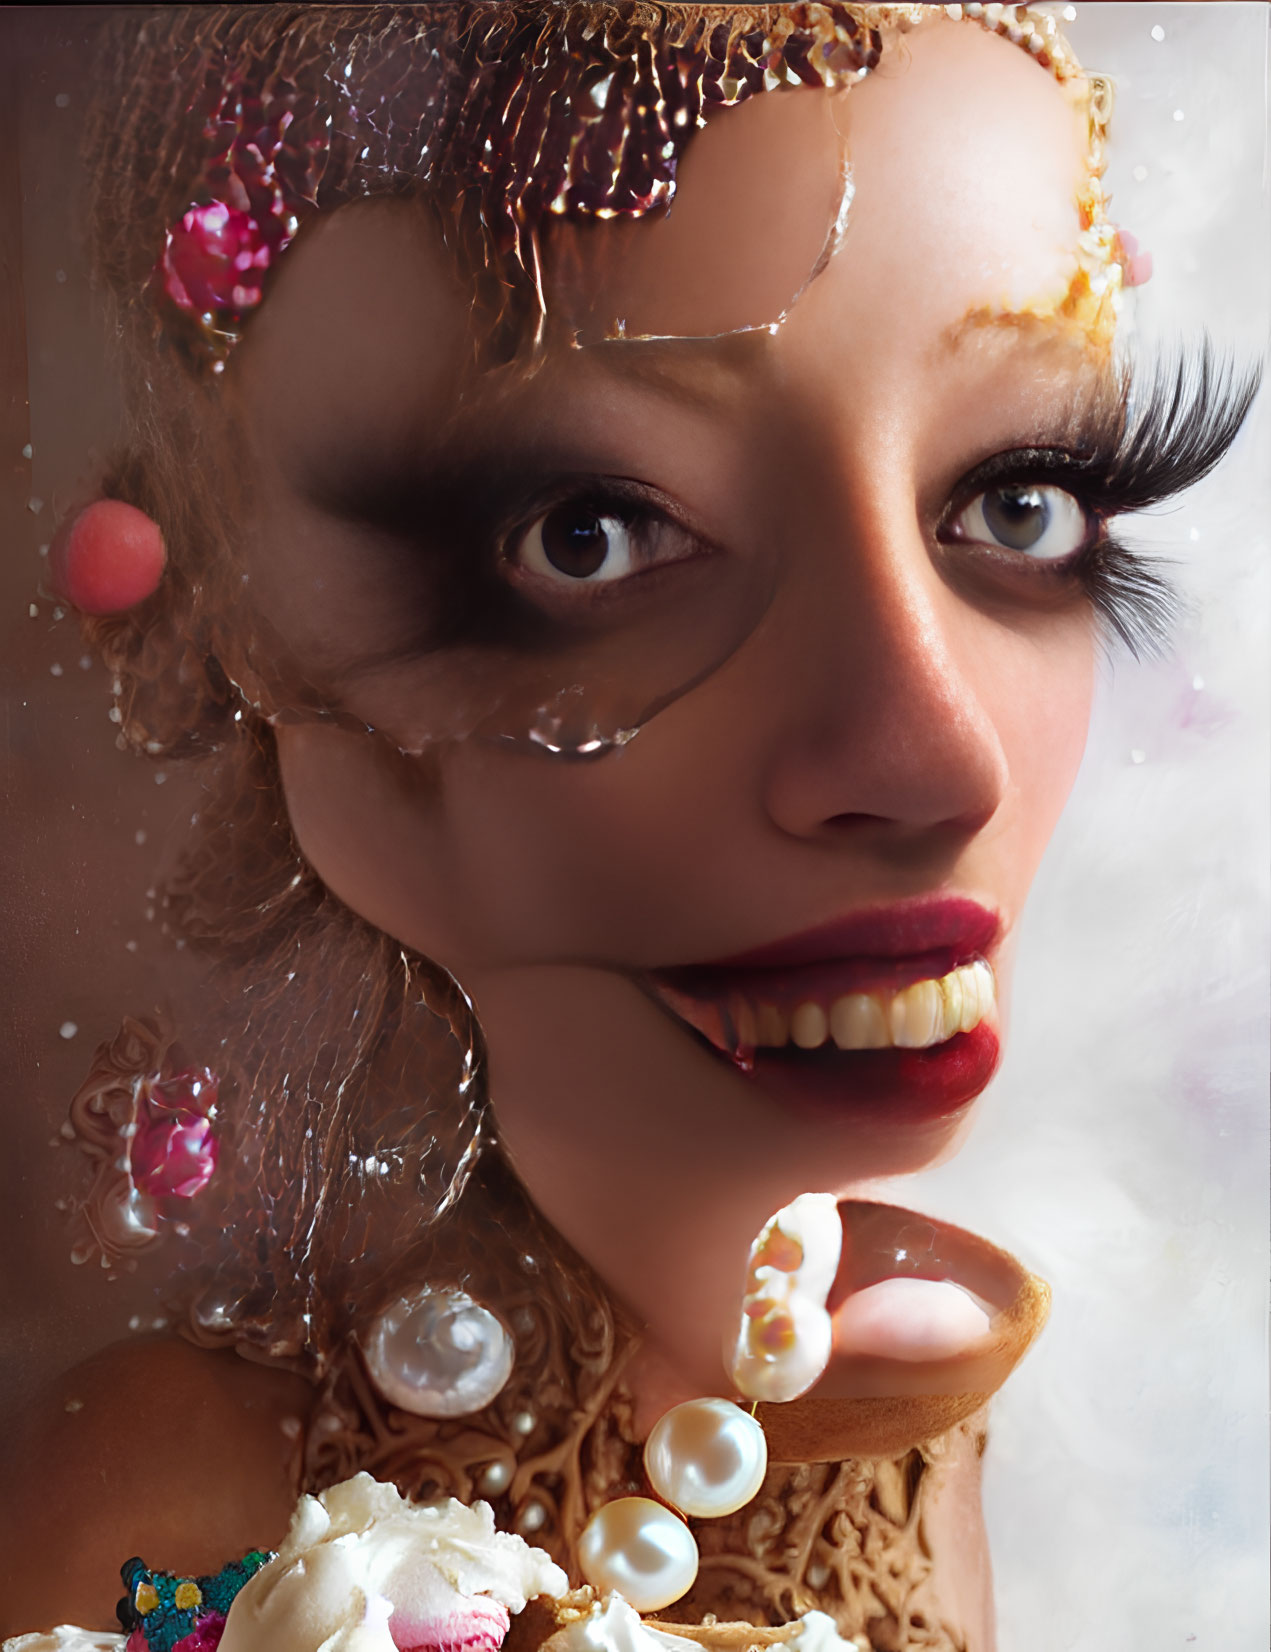 Portrait of a woman with artistic makeup and playful expression, adorned with pearls, flowers, and beads.